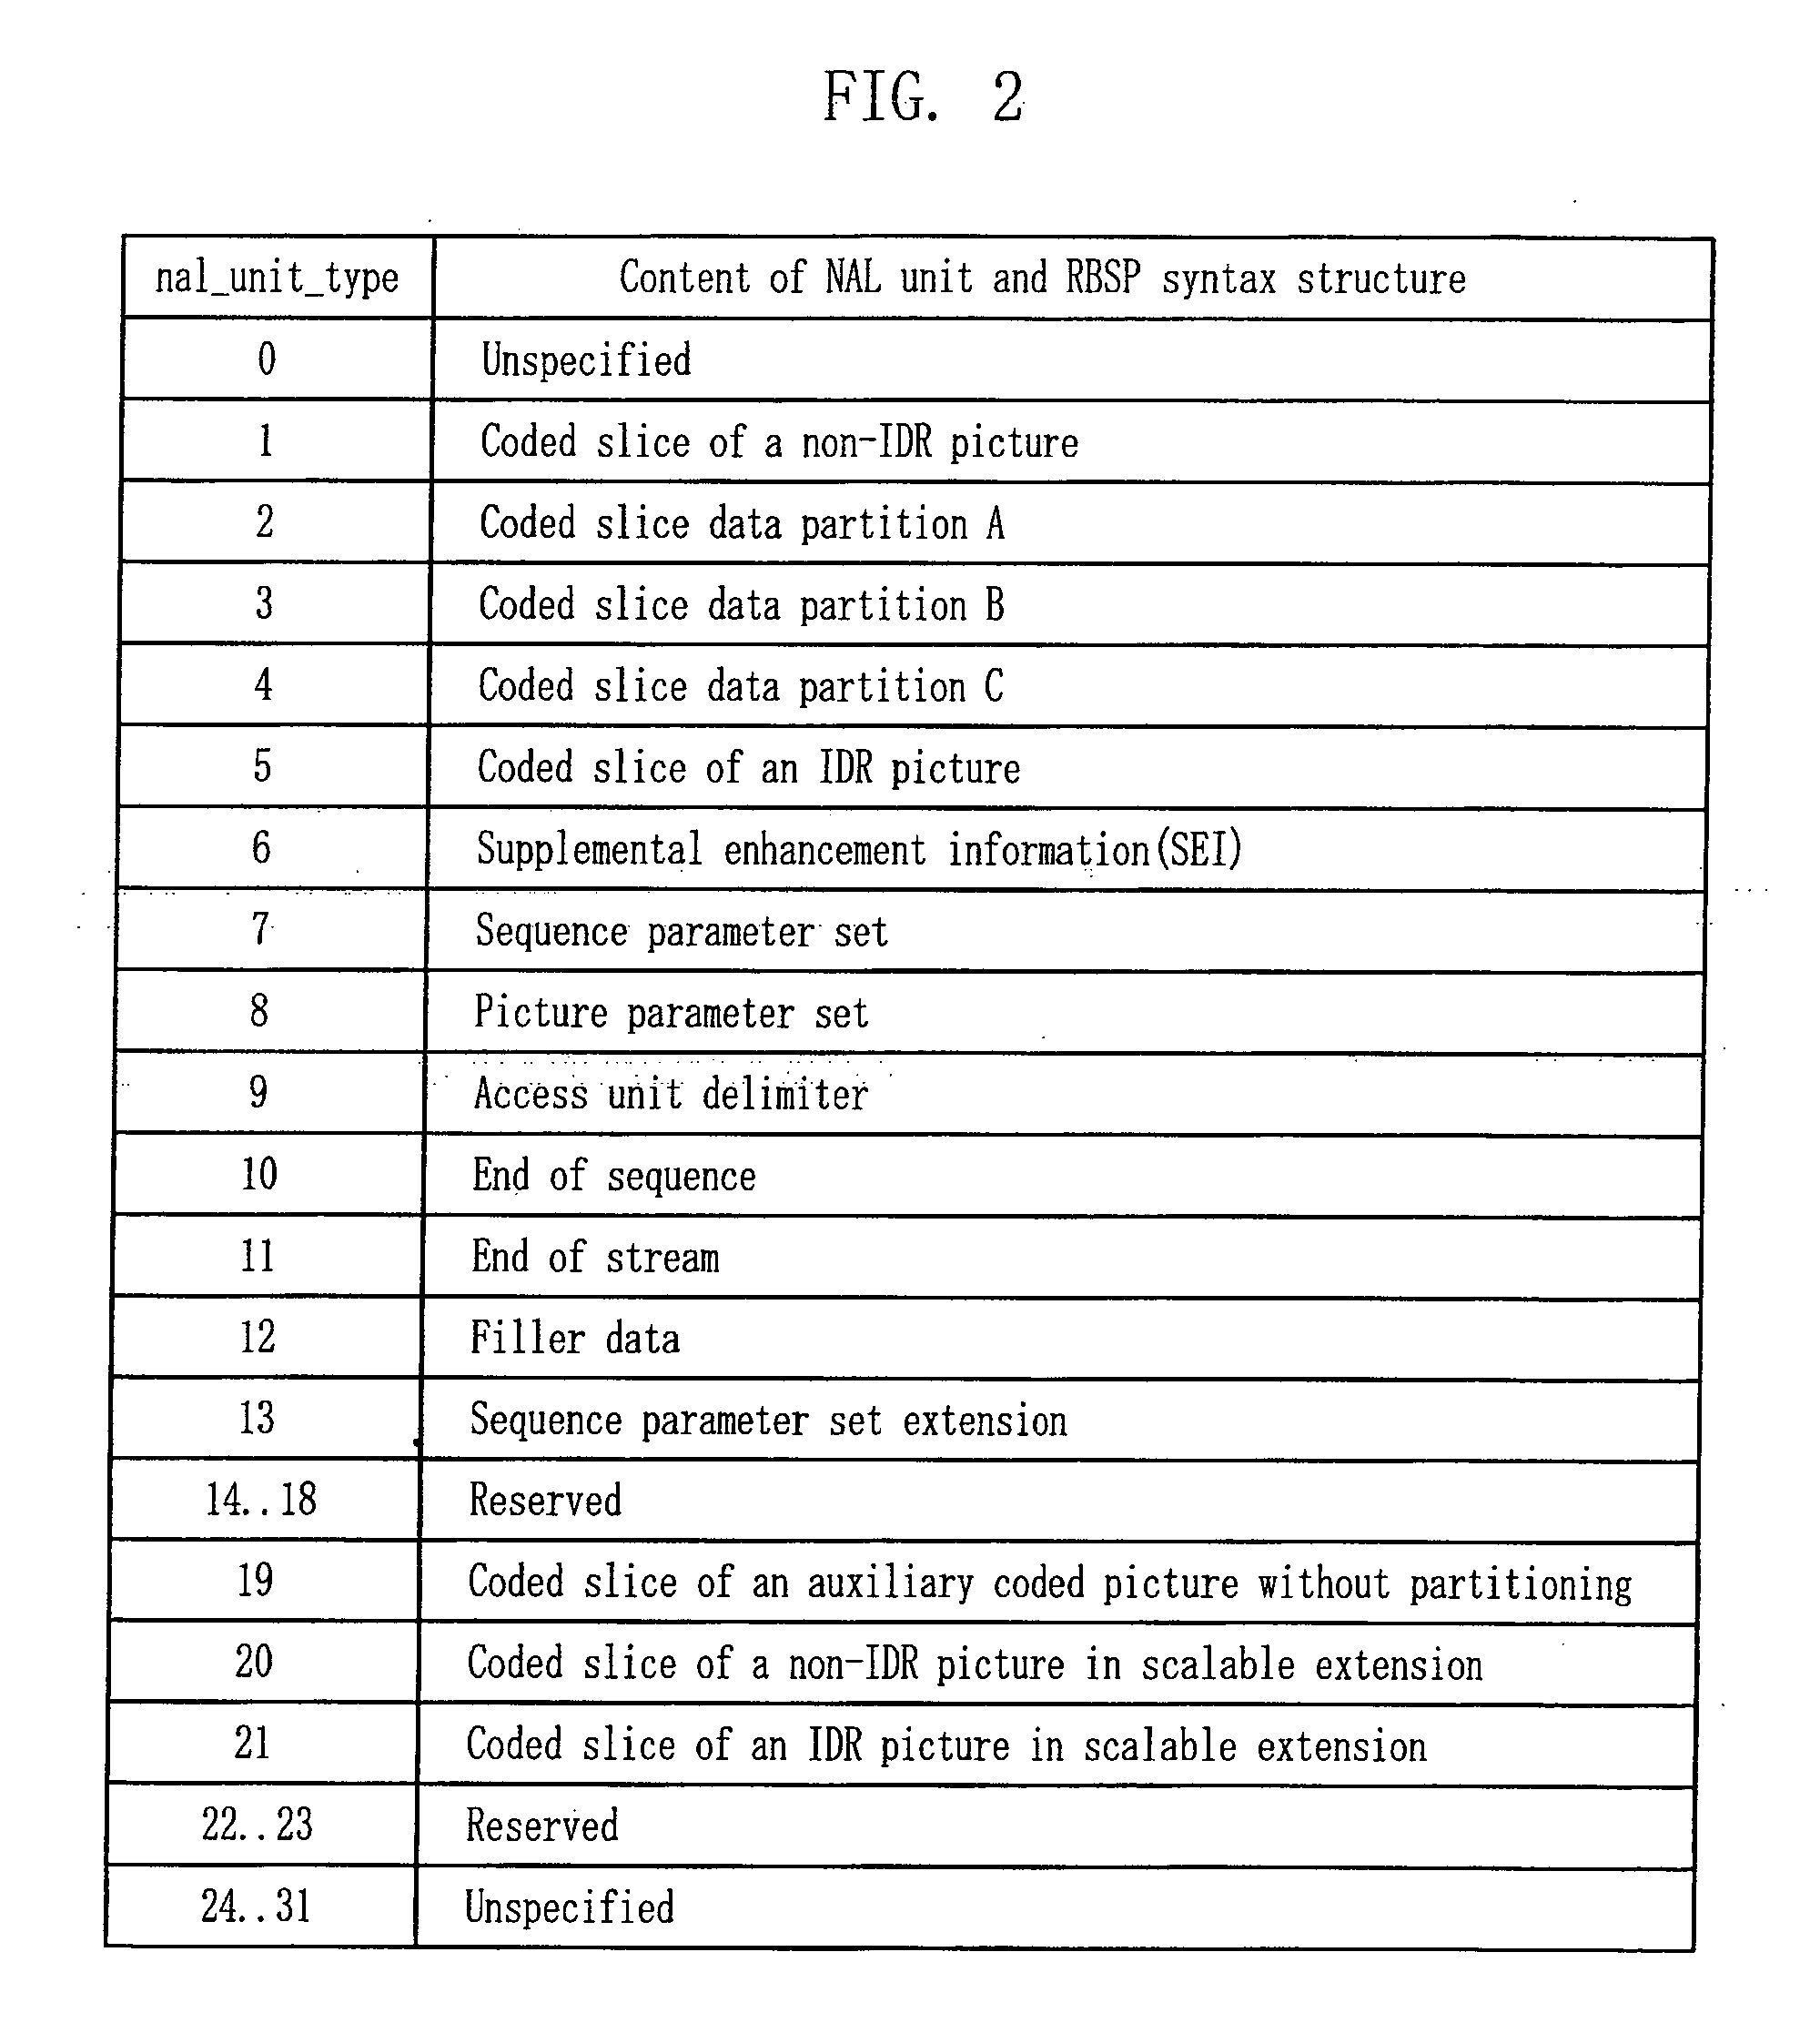 Method for determining packet type for svc video bitstream, and rtp packetizing apparatus and method using the same